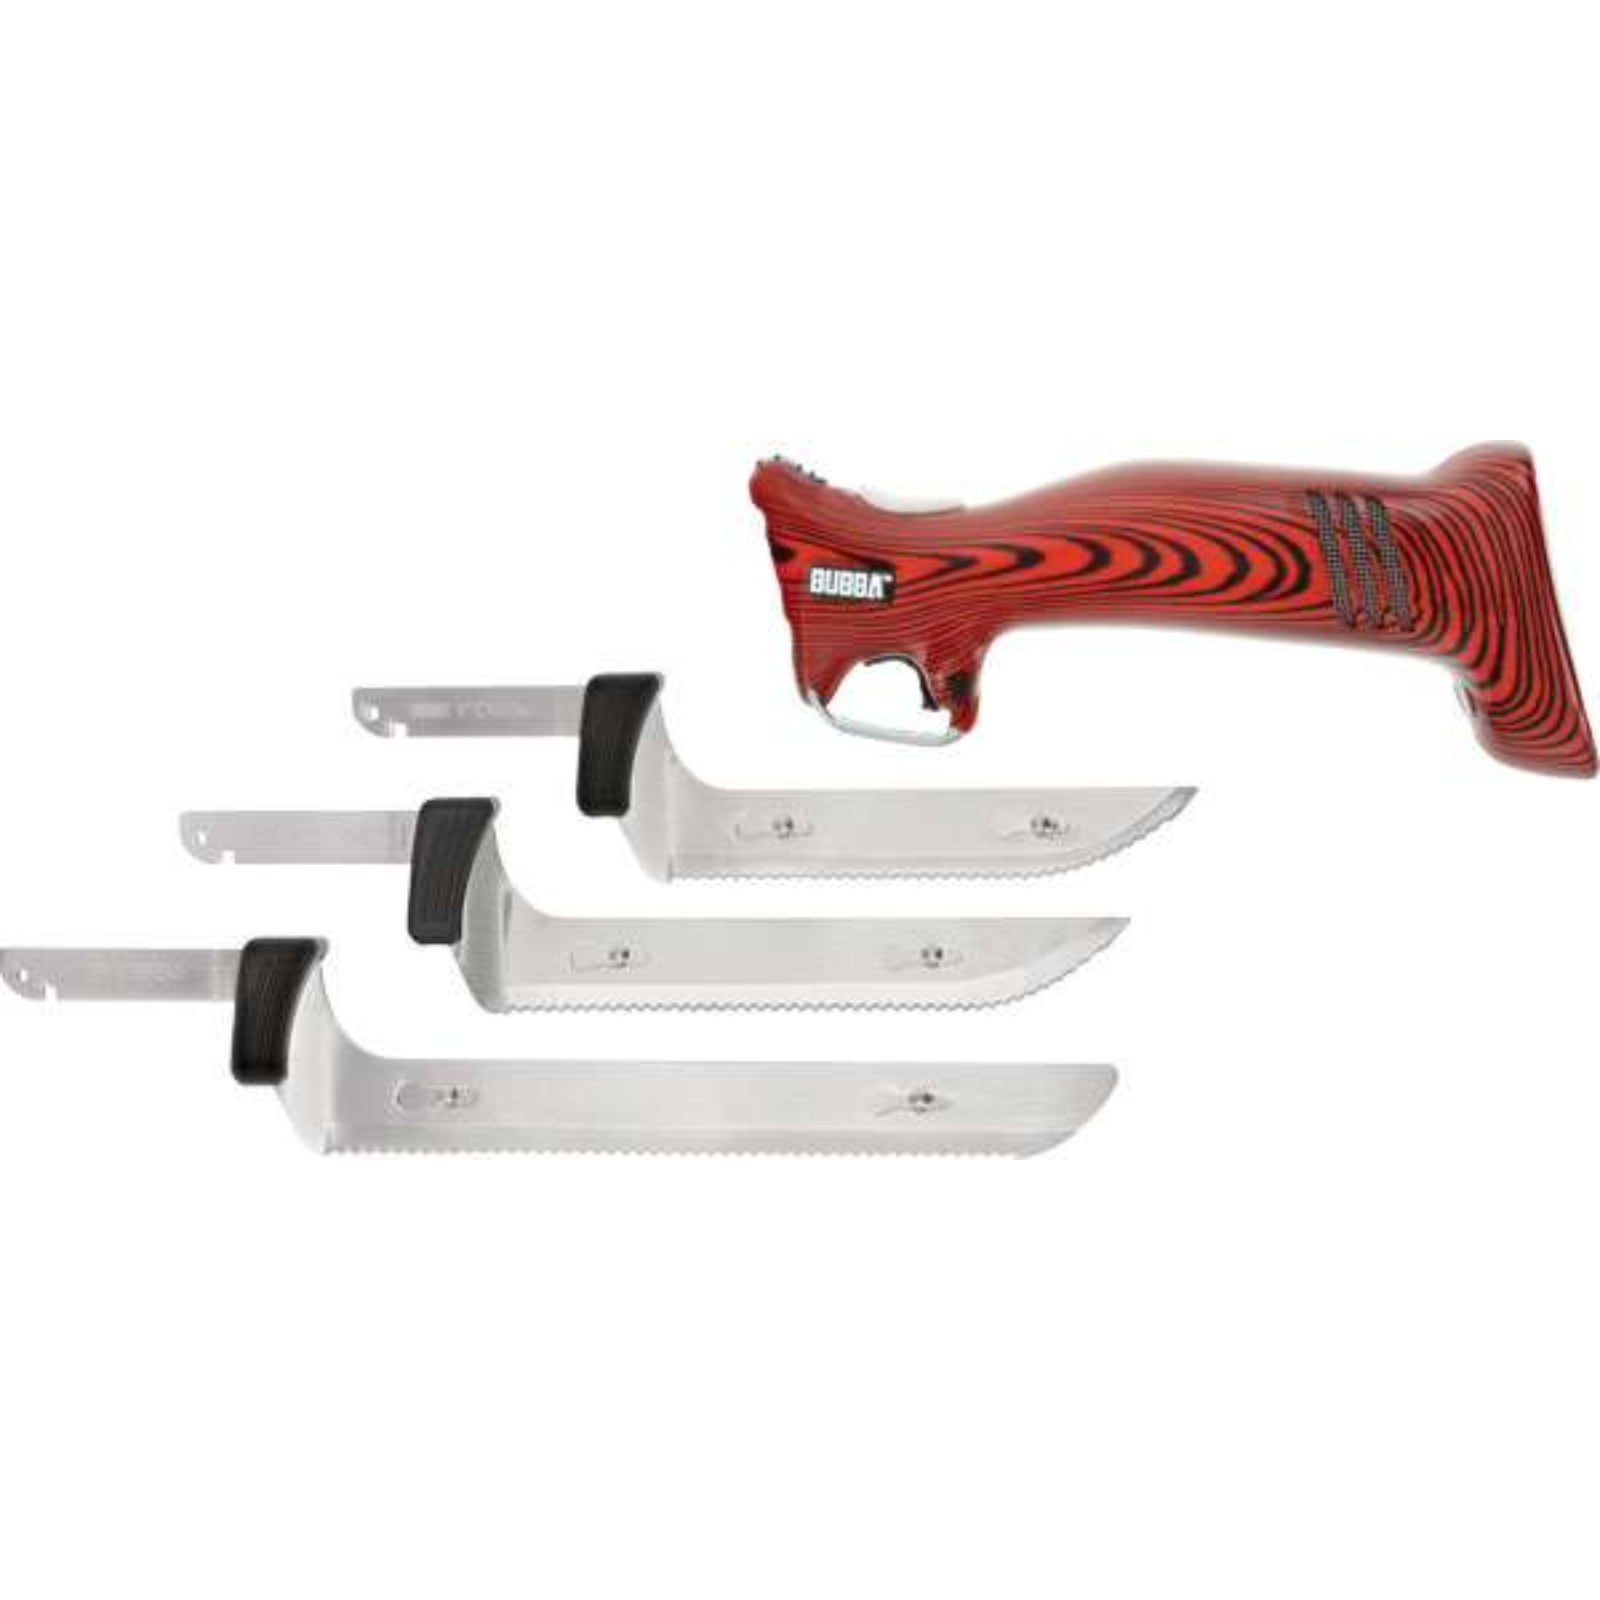 Bubba Blade 4 piece knife set NEW - sporting goods - by owner - sale -  craigslist